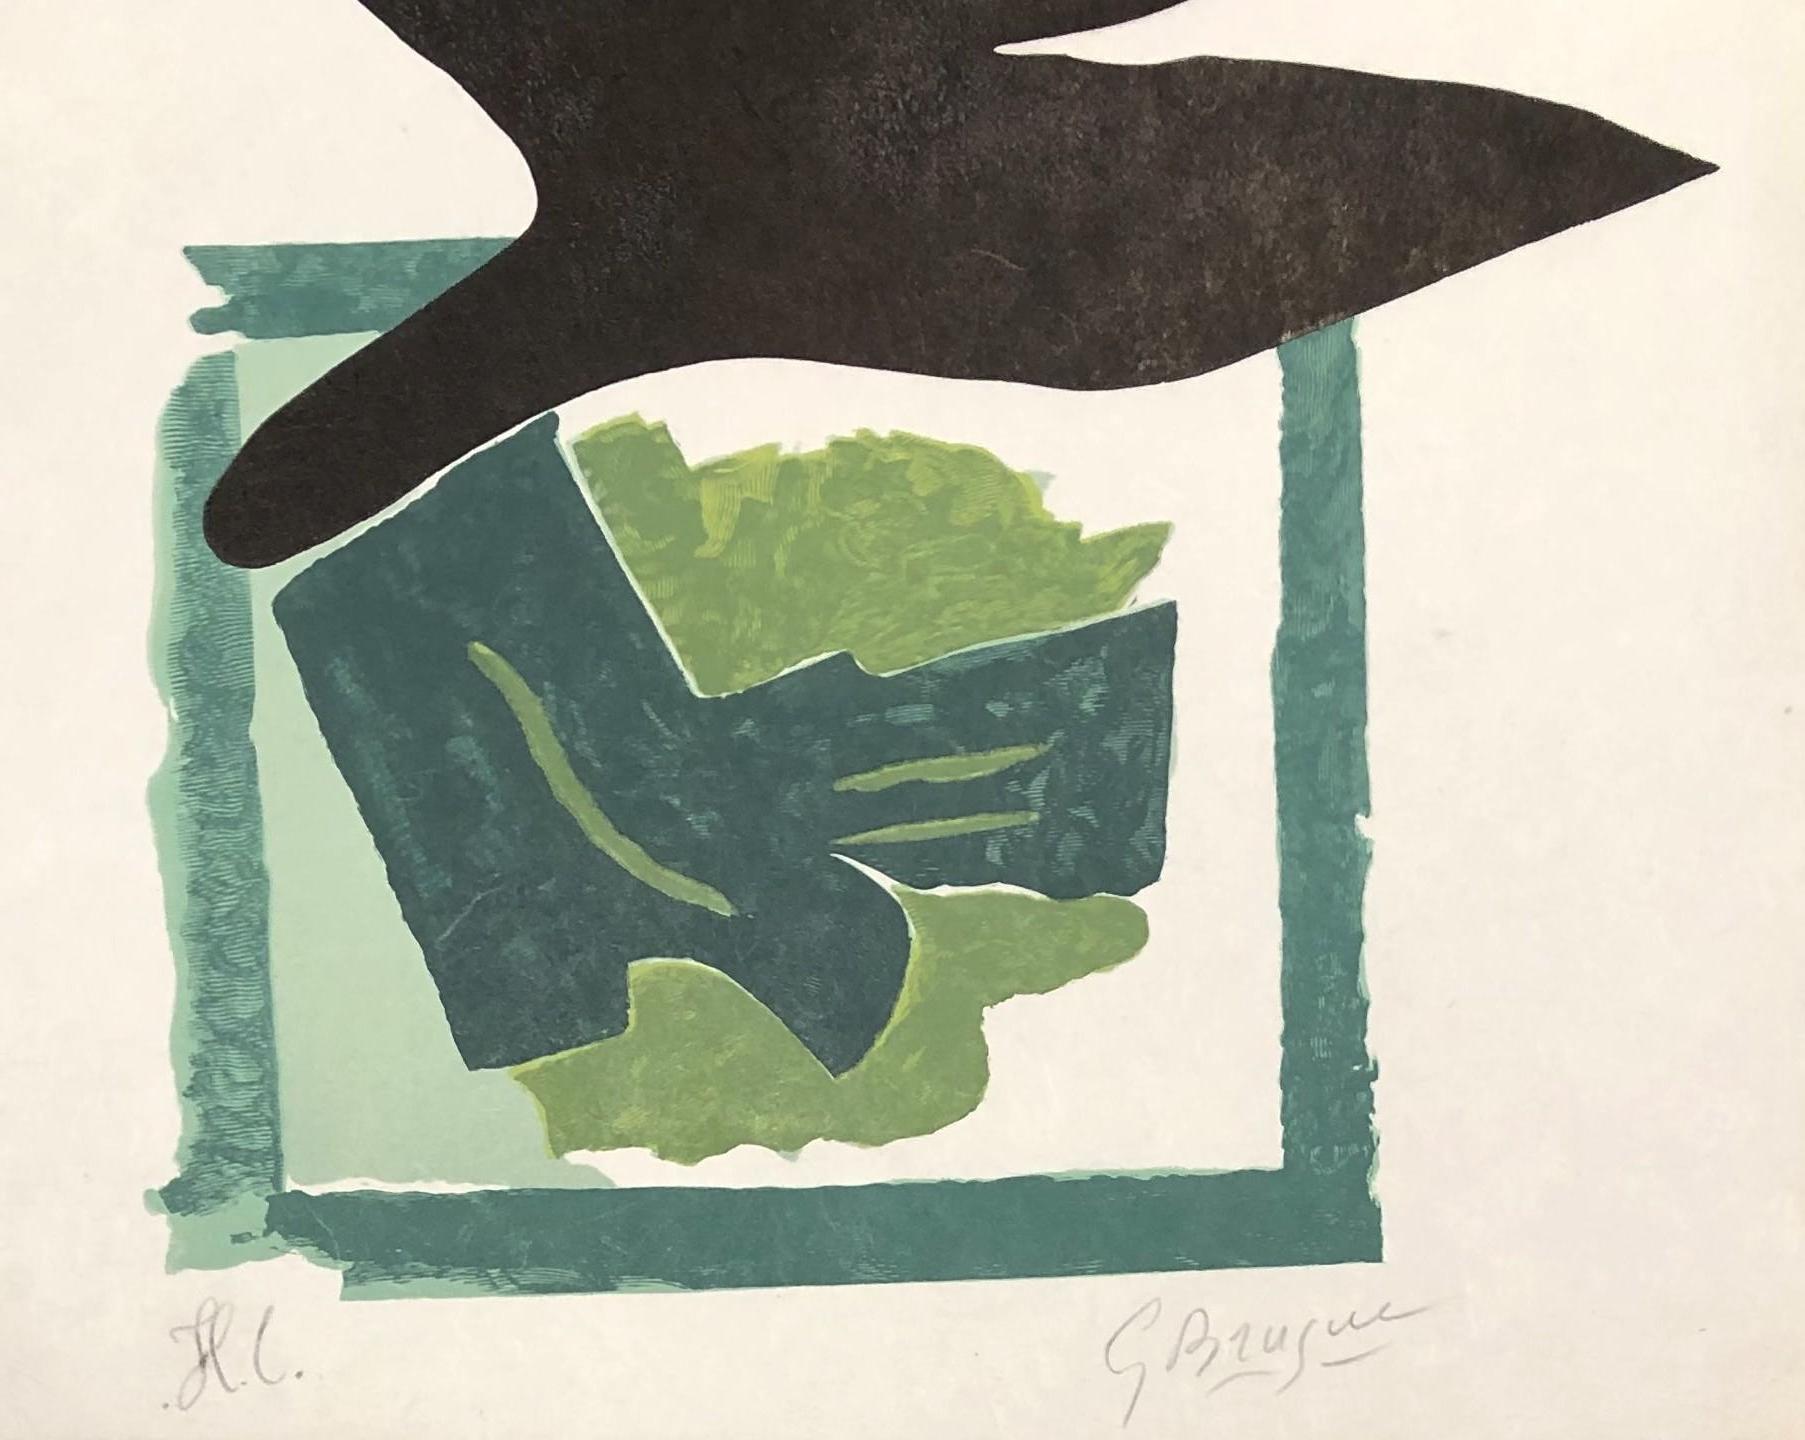 Georges BRAQUE
Oiseau noir sur fond vert (black bird on green background)

Original woodcut, 1962
Handsigned in pencil
Hors Commerce proof (aside the edition of 50 copies)
On Japon nacré paper, size 47 x 37 cm (c. 18,5 x 14,6 in)
Very good